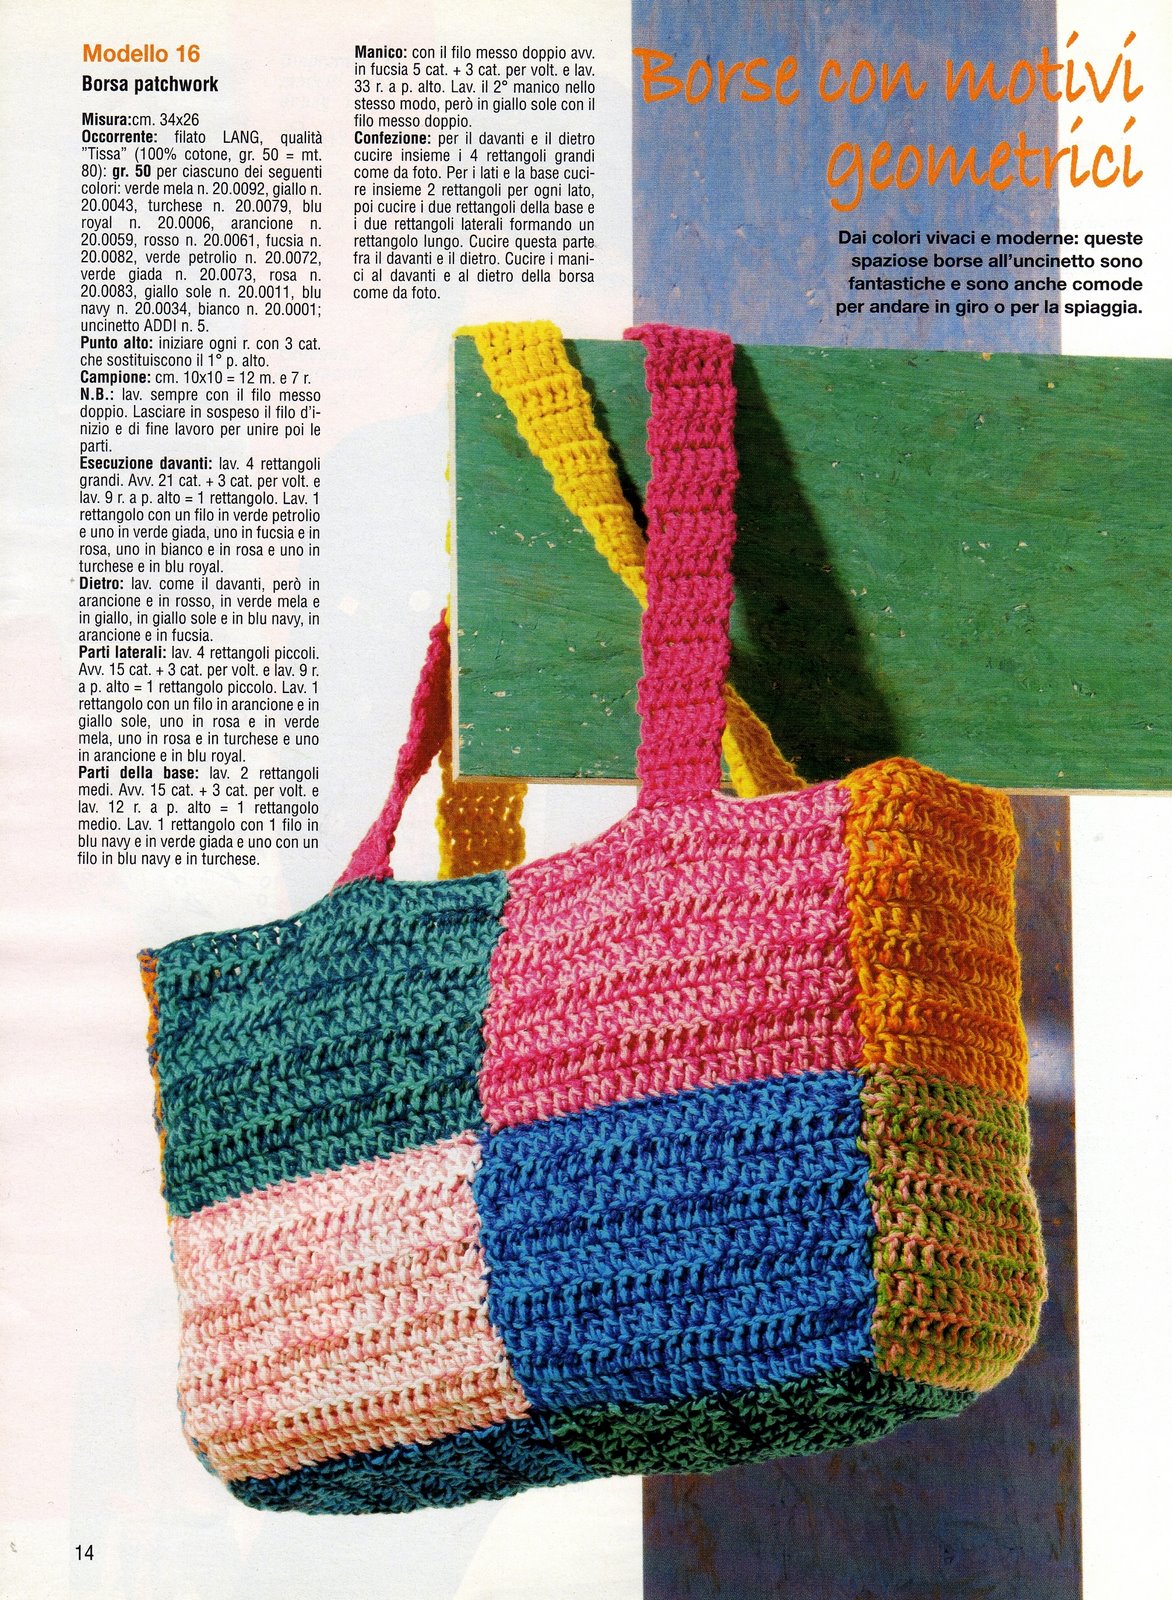 Crochet bag with colored squares